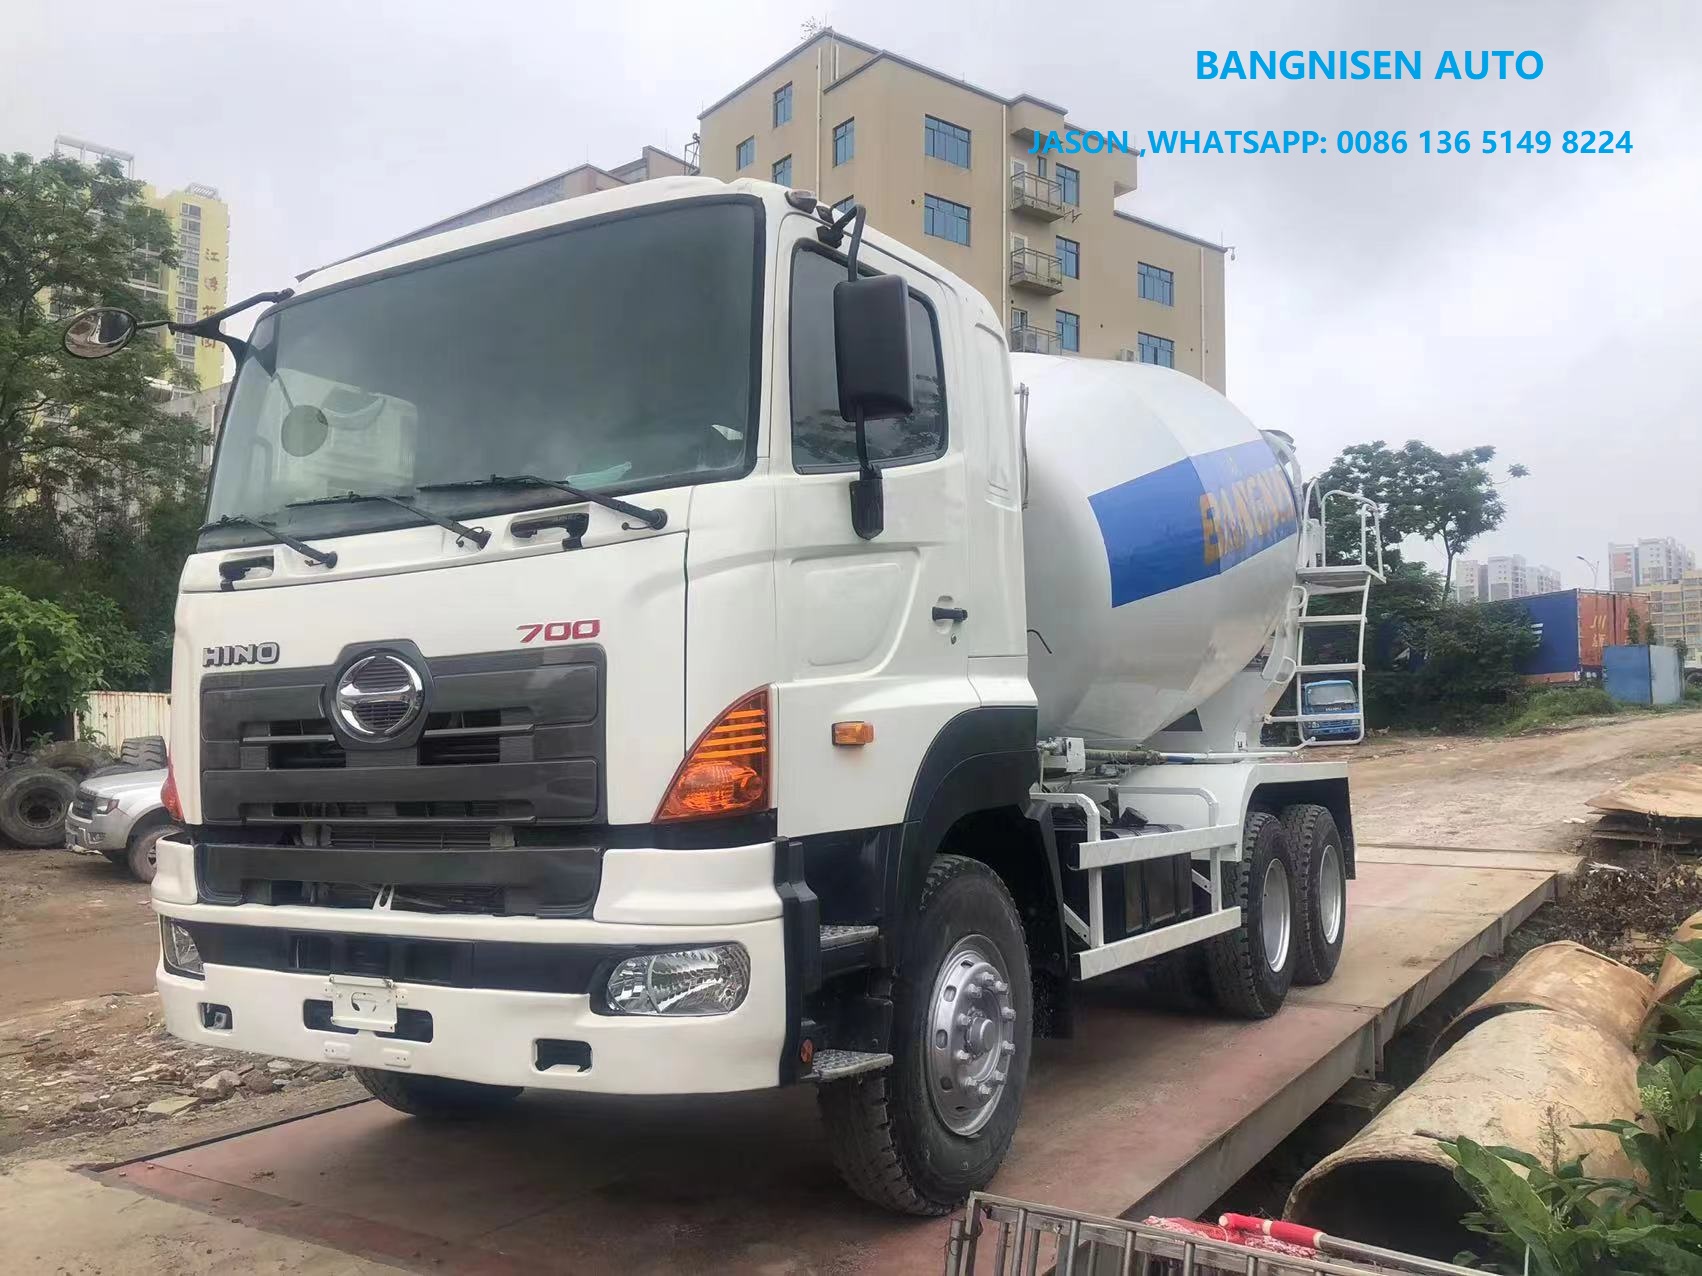 2016 Year Reconditioned HINO 700 cement mixer construction truck with 10m³ drum(图5)